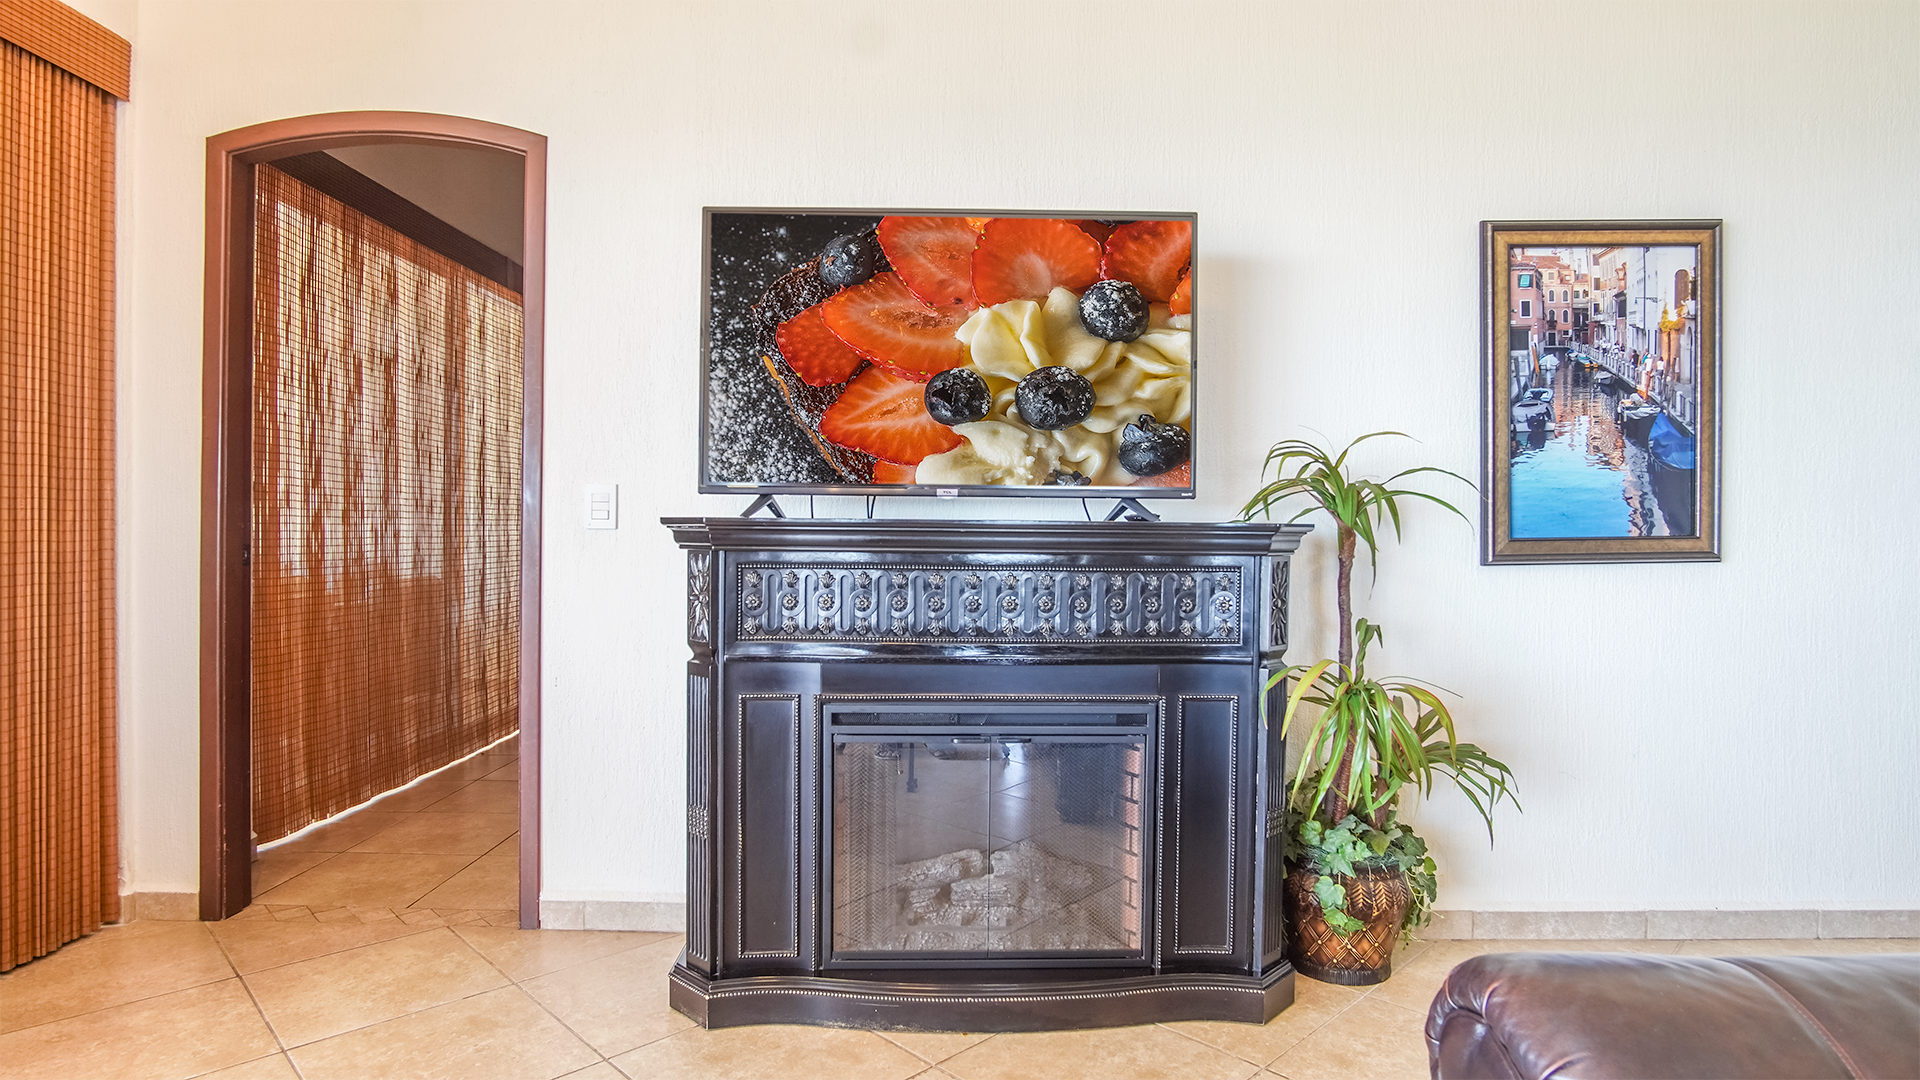 TV and electric fireplace add to the comfort of there living groom.